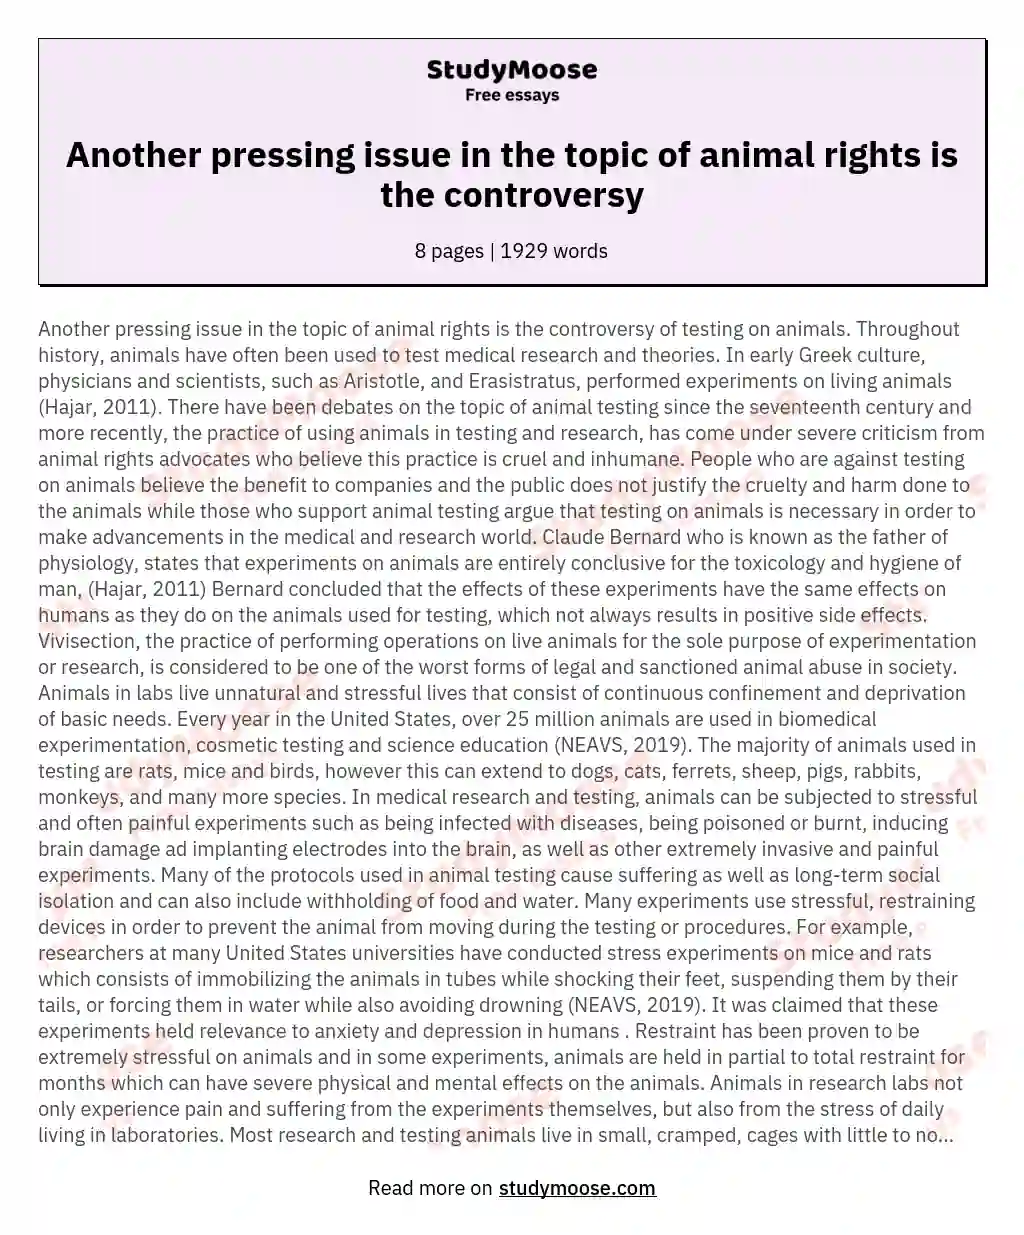 Another pressing issue in the topic of animal rights is the controversy essay